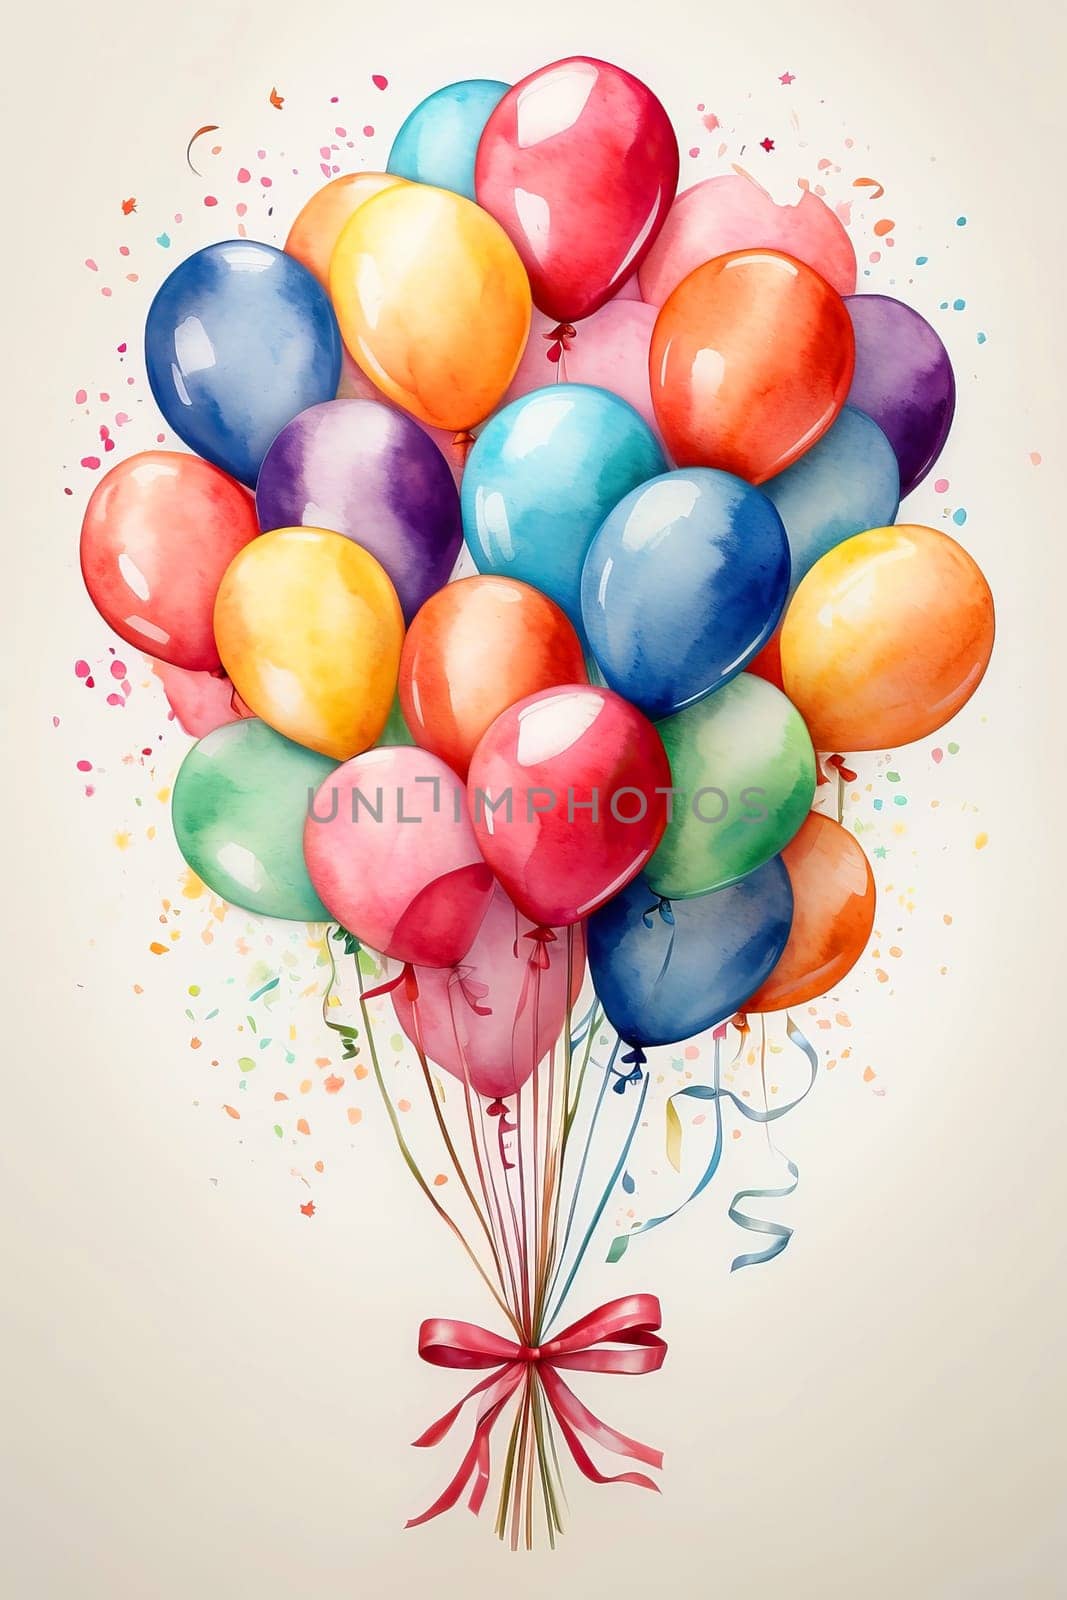 Colored balloons drawn watercolor by applesstock